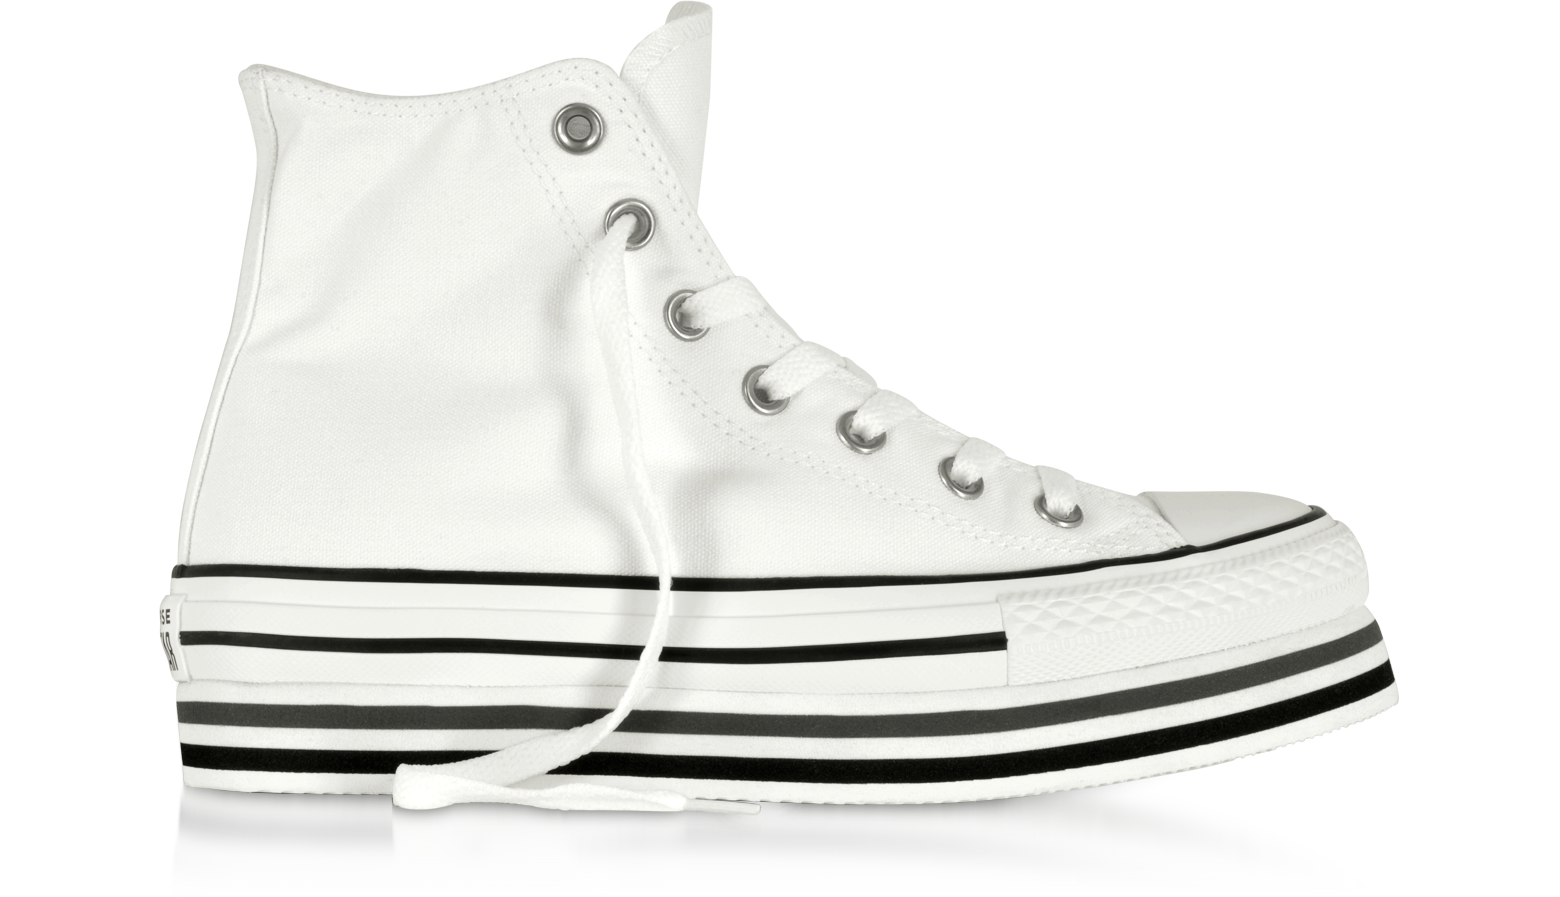 limited edition womens converse